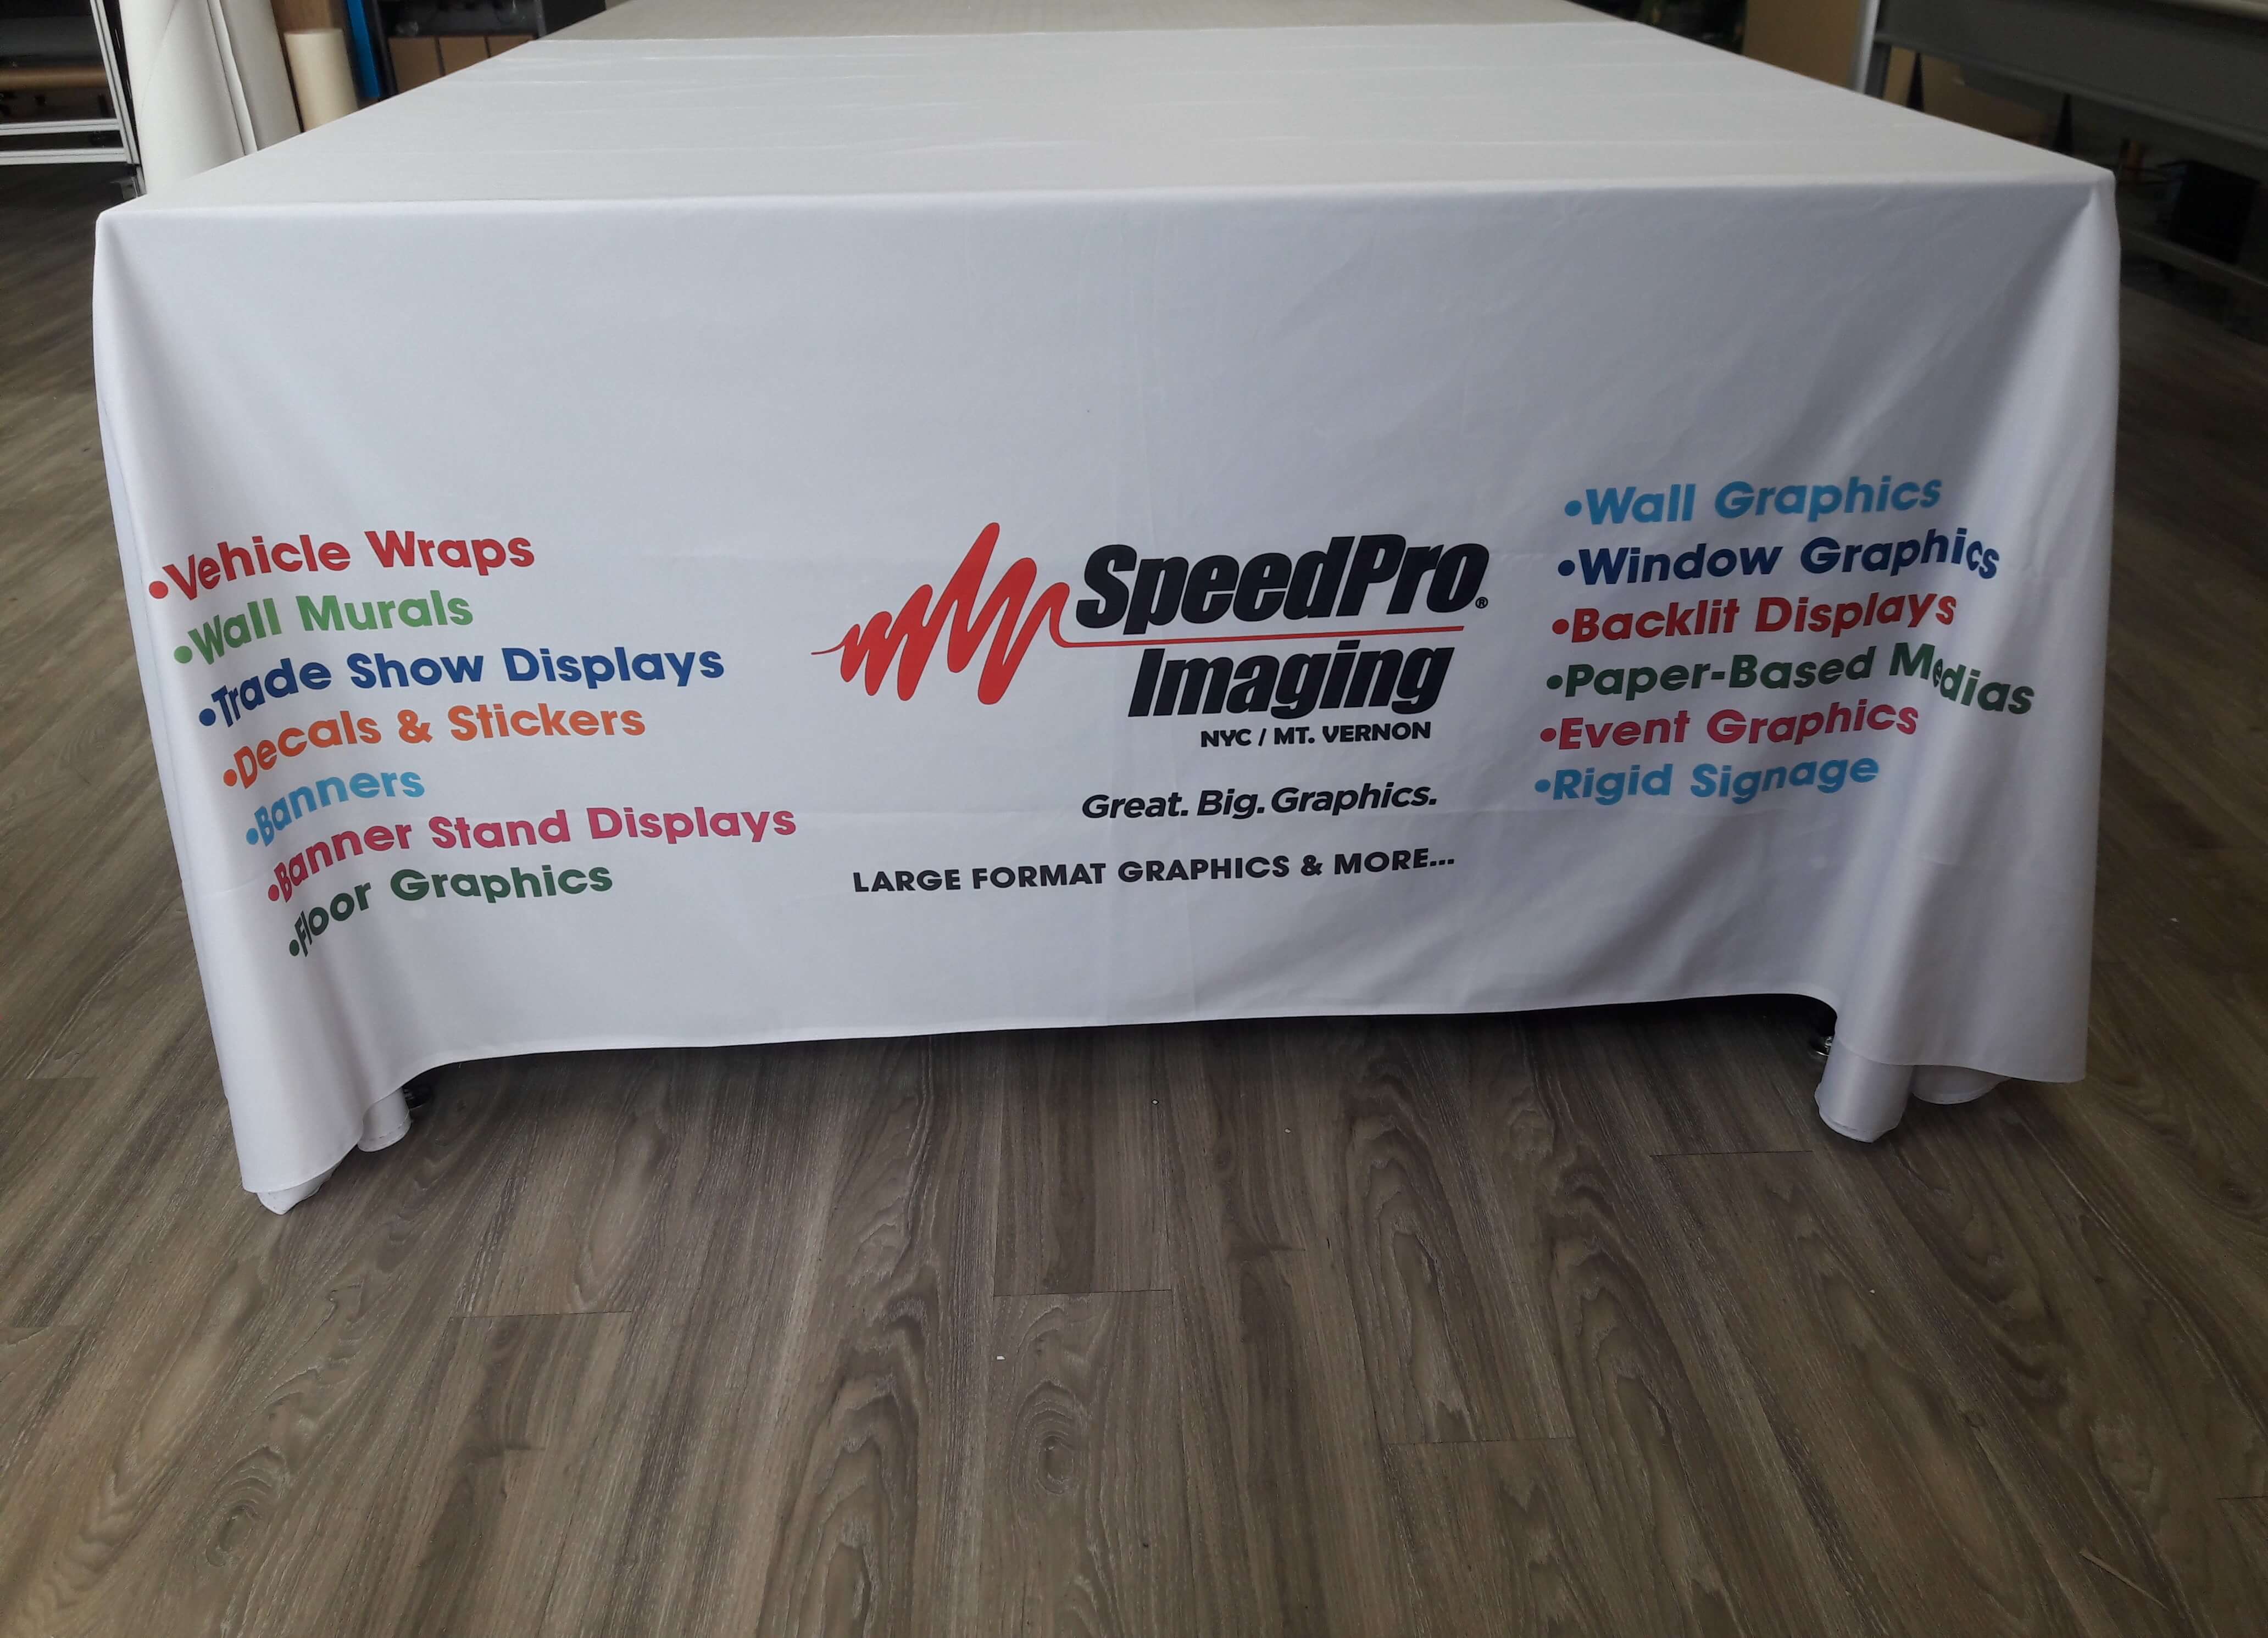 SpeedPro Imaging Table Graphic